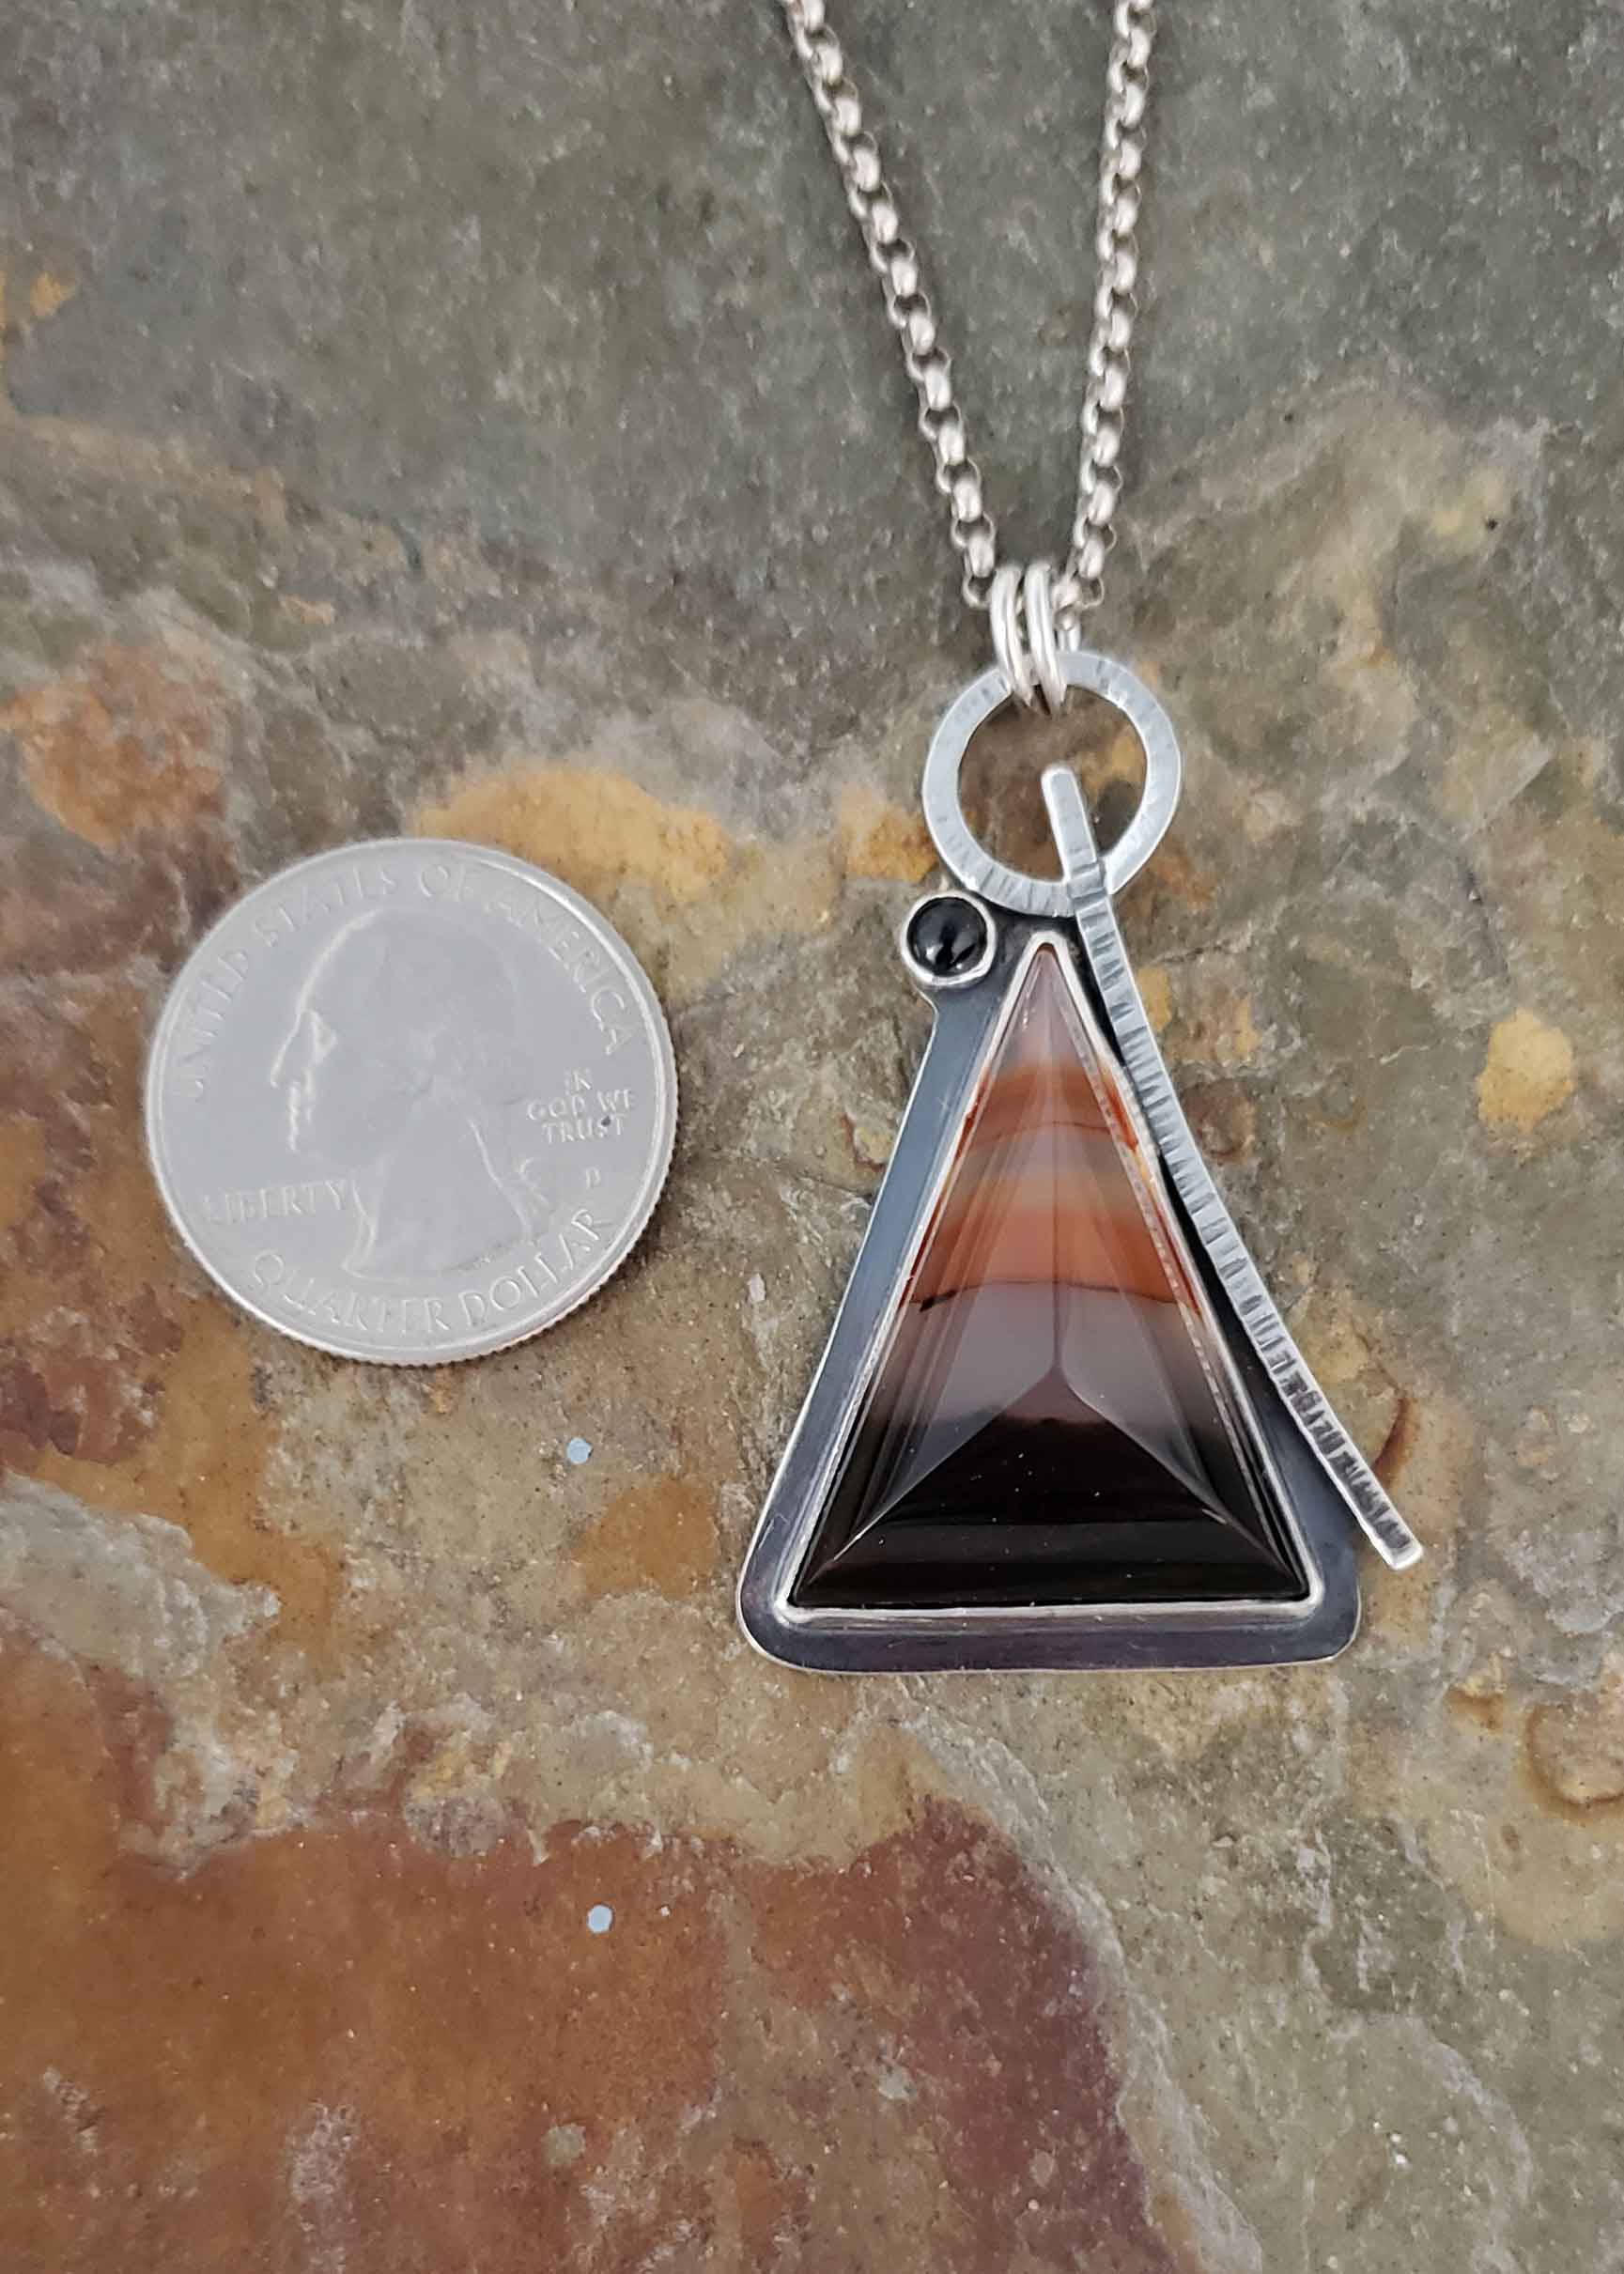 Pyramid strength in this ornage and black pendant.